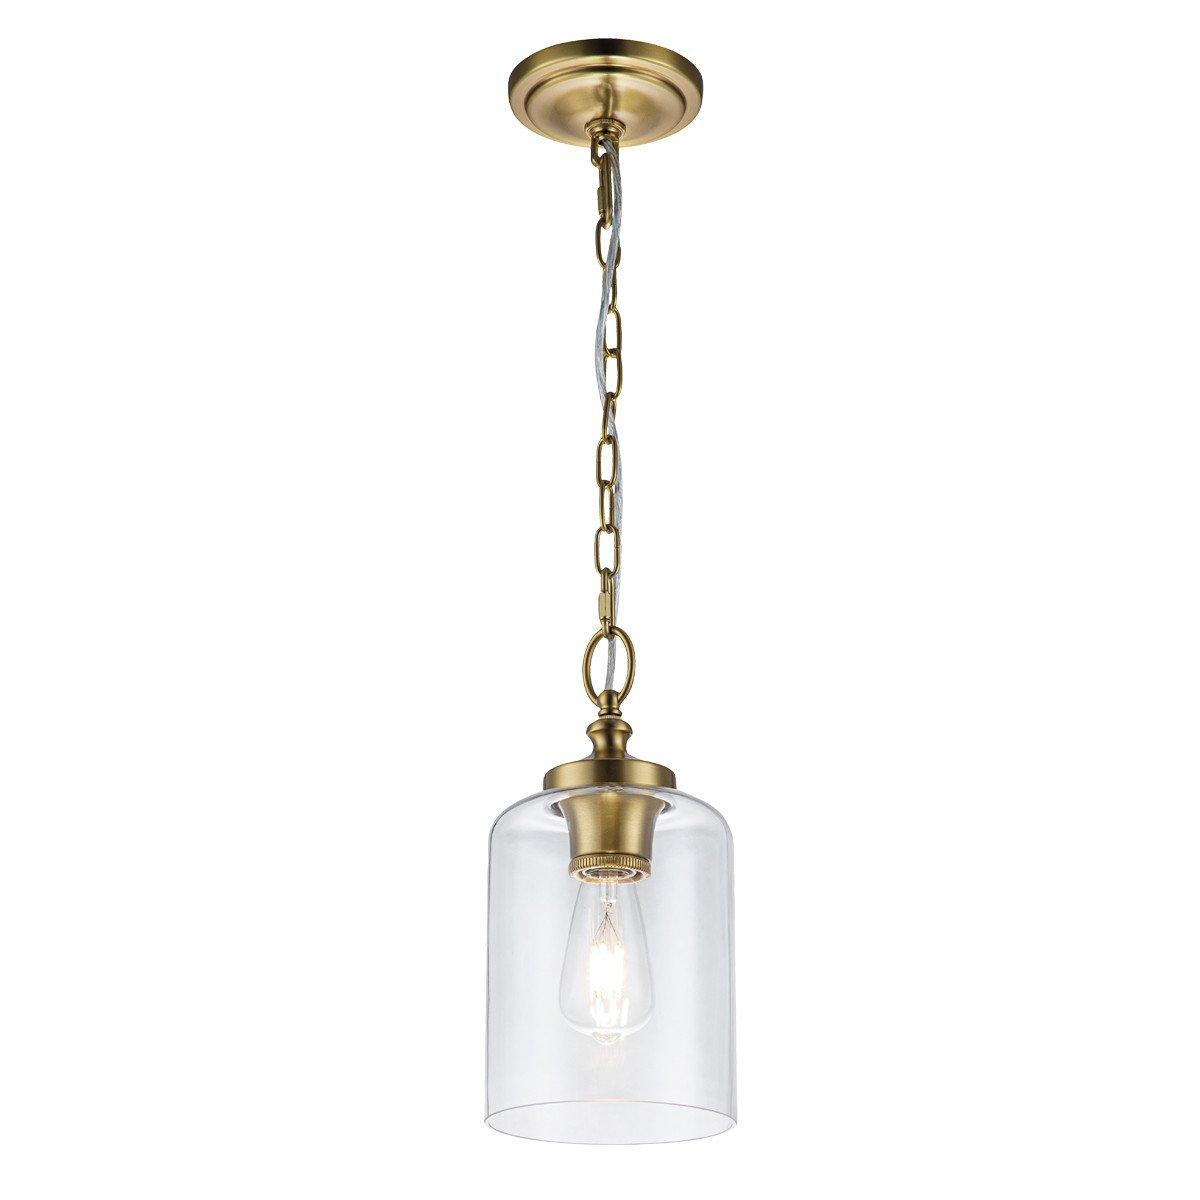 Feiss Hounslow Dome Pendant Ceiling Light Burnished Brass